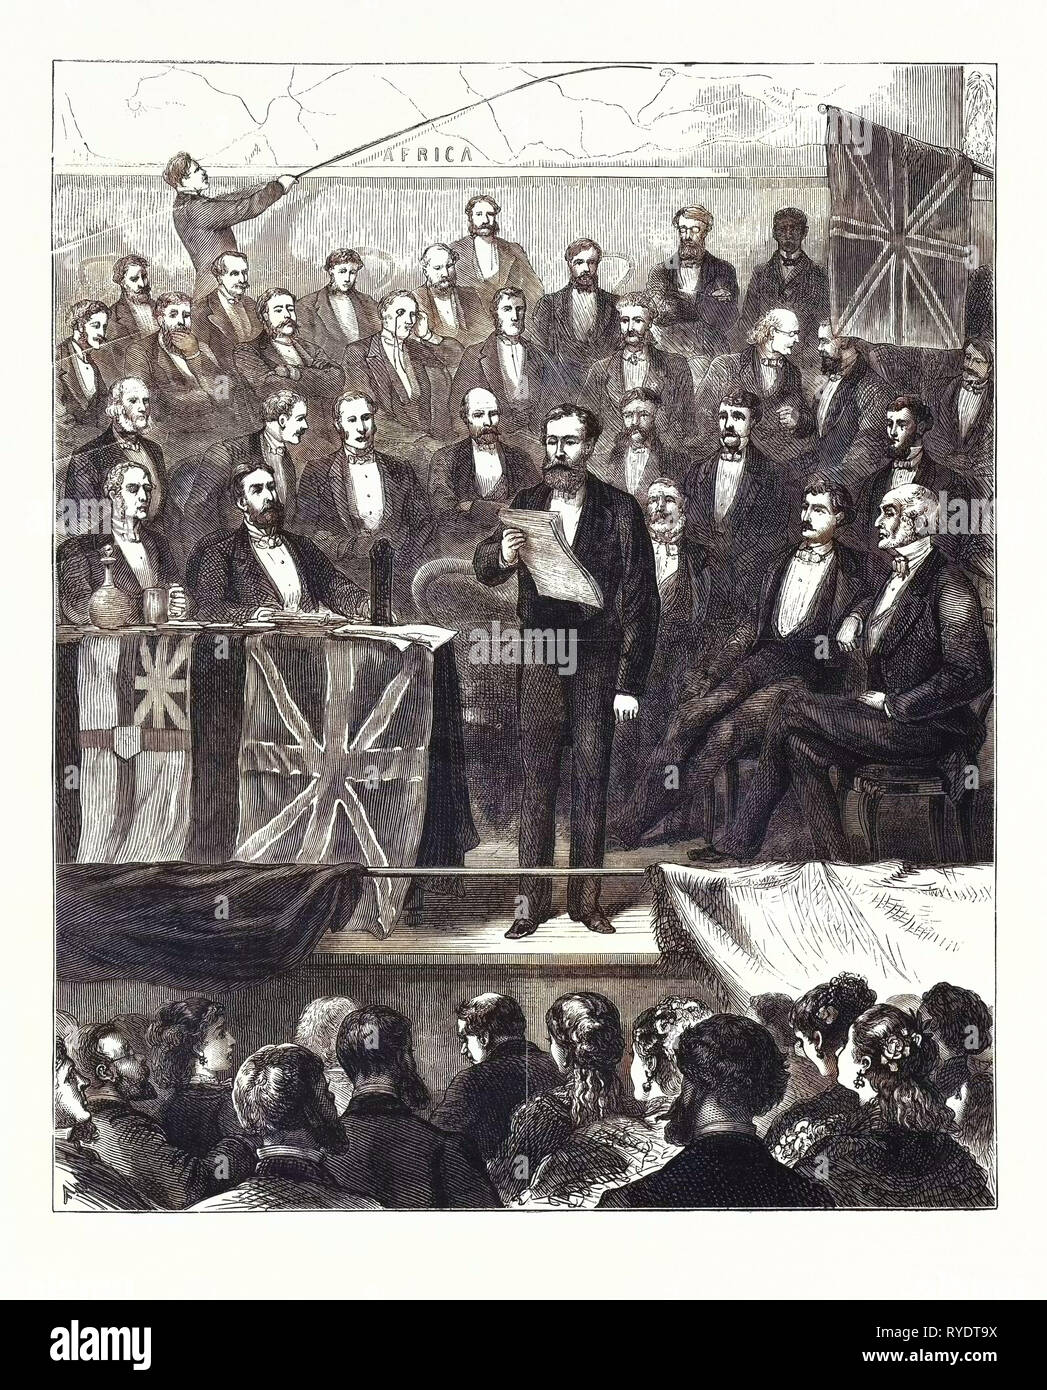 African Exploration : Lieut. Cameron Reading an Account of His Adventures in Central Africa Before the Royal Geographical Society, at St. James's Hall, on Tuesday, April 11th., London, Engraving 1876, UK, Britain, British, Europe, United Kingdom, Great Britain, European Stock Photo